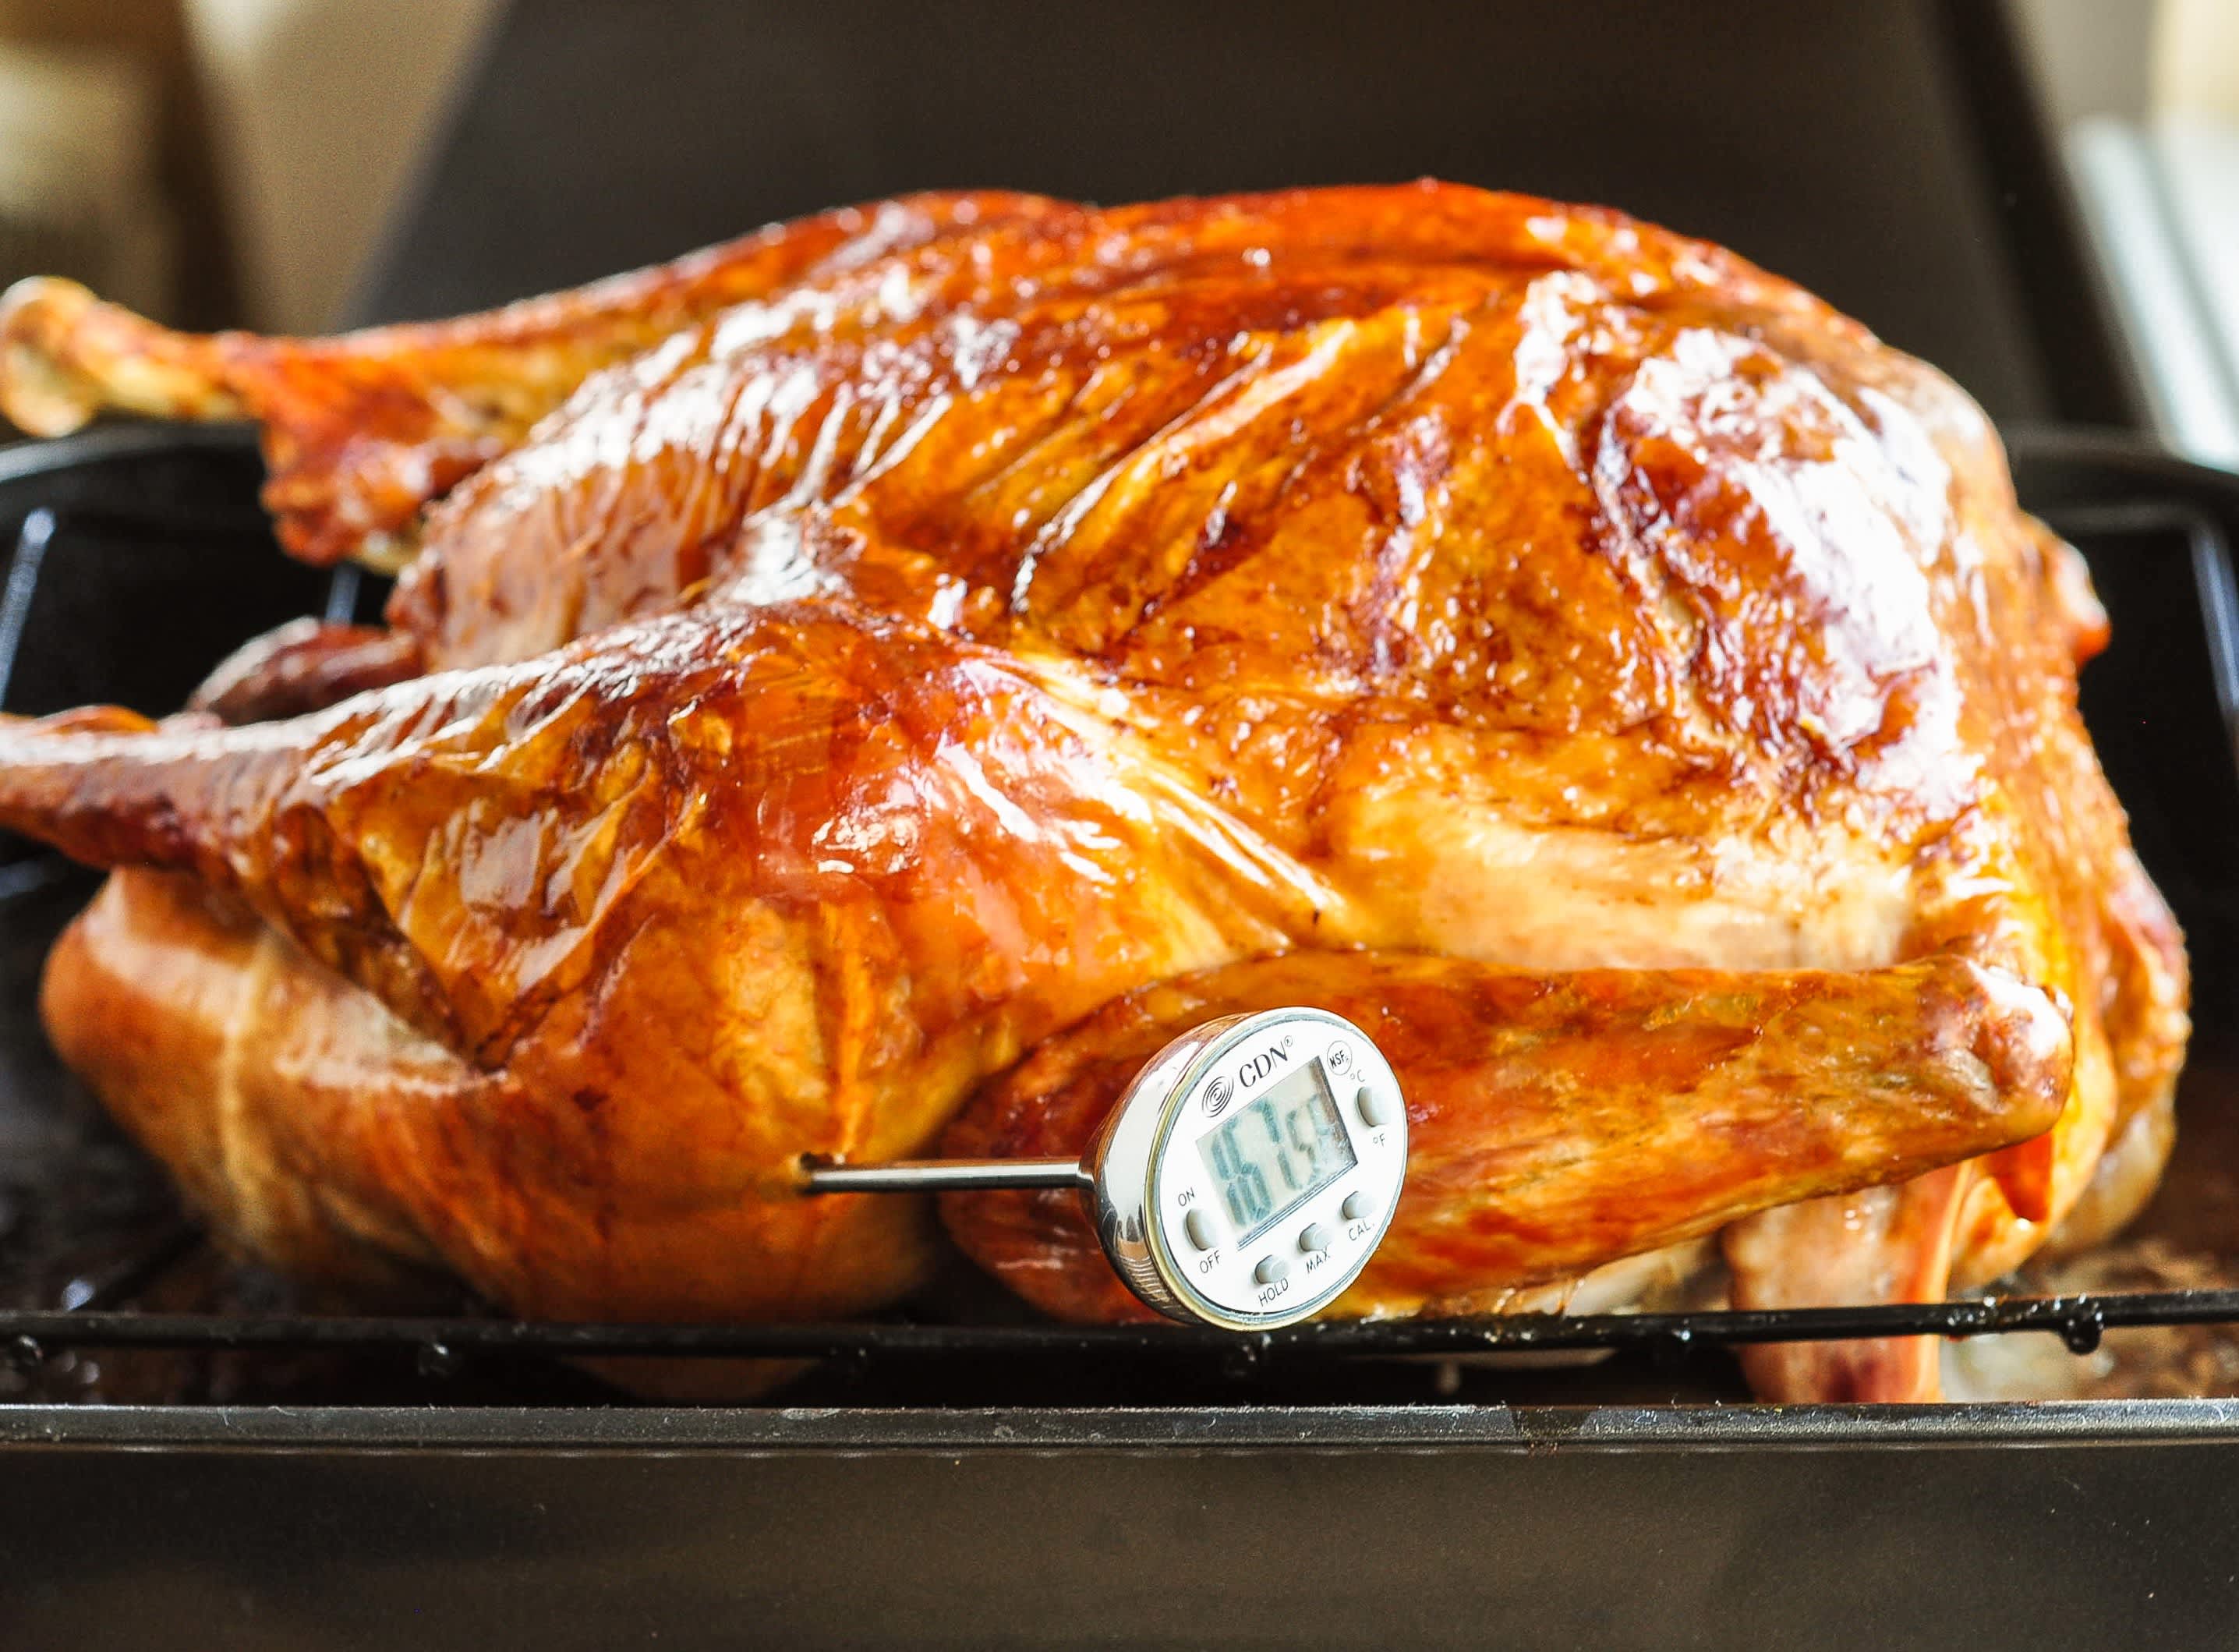 How to Check a Turkey's Temperature for Doneness